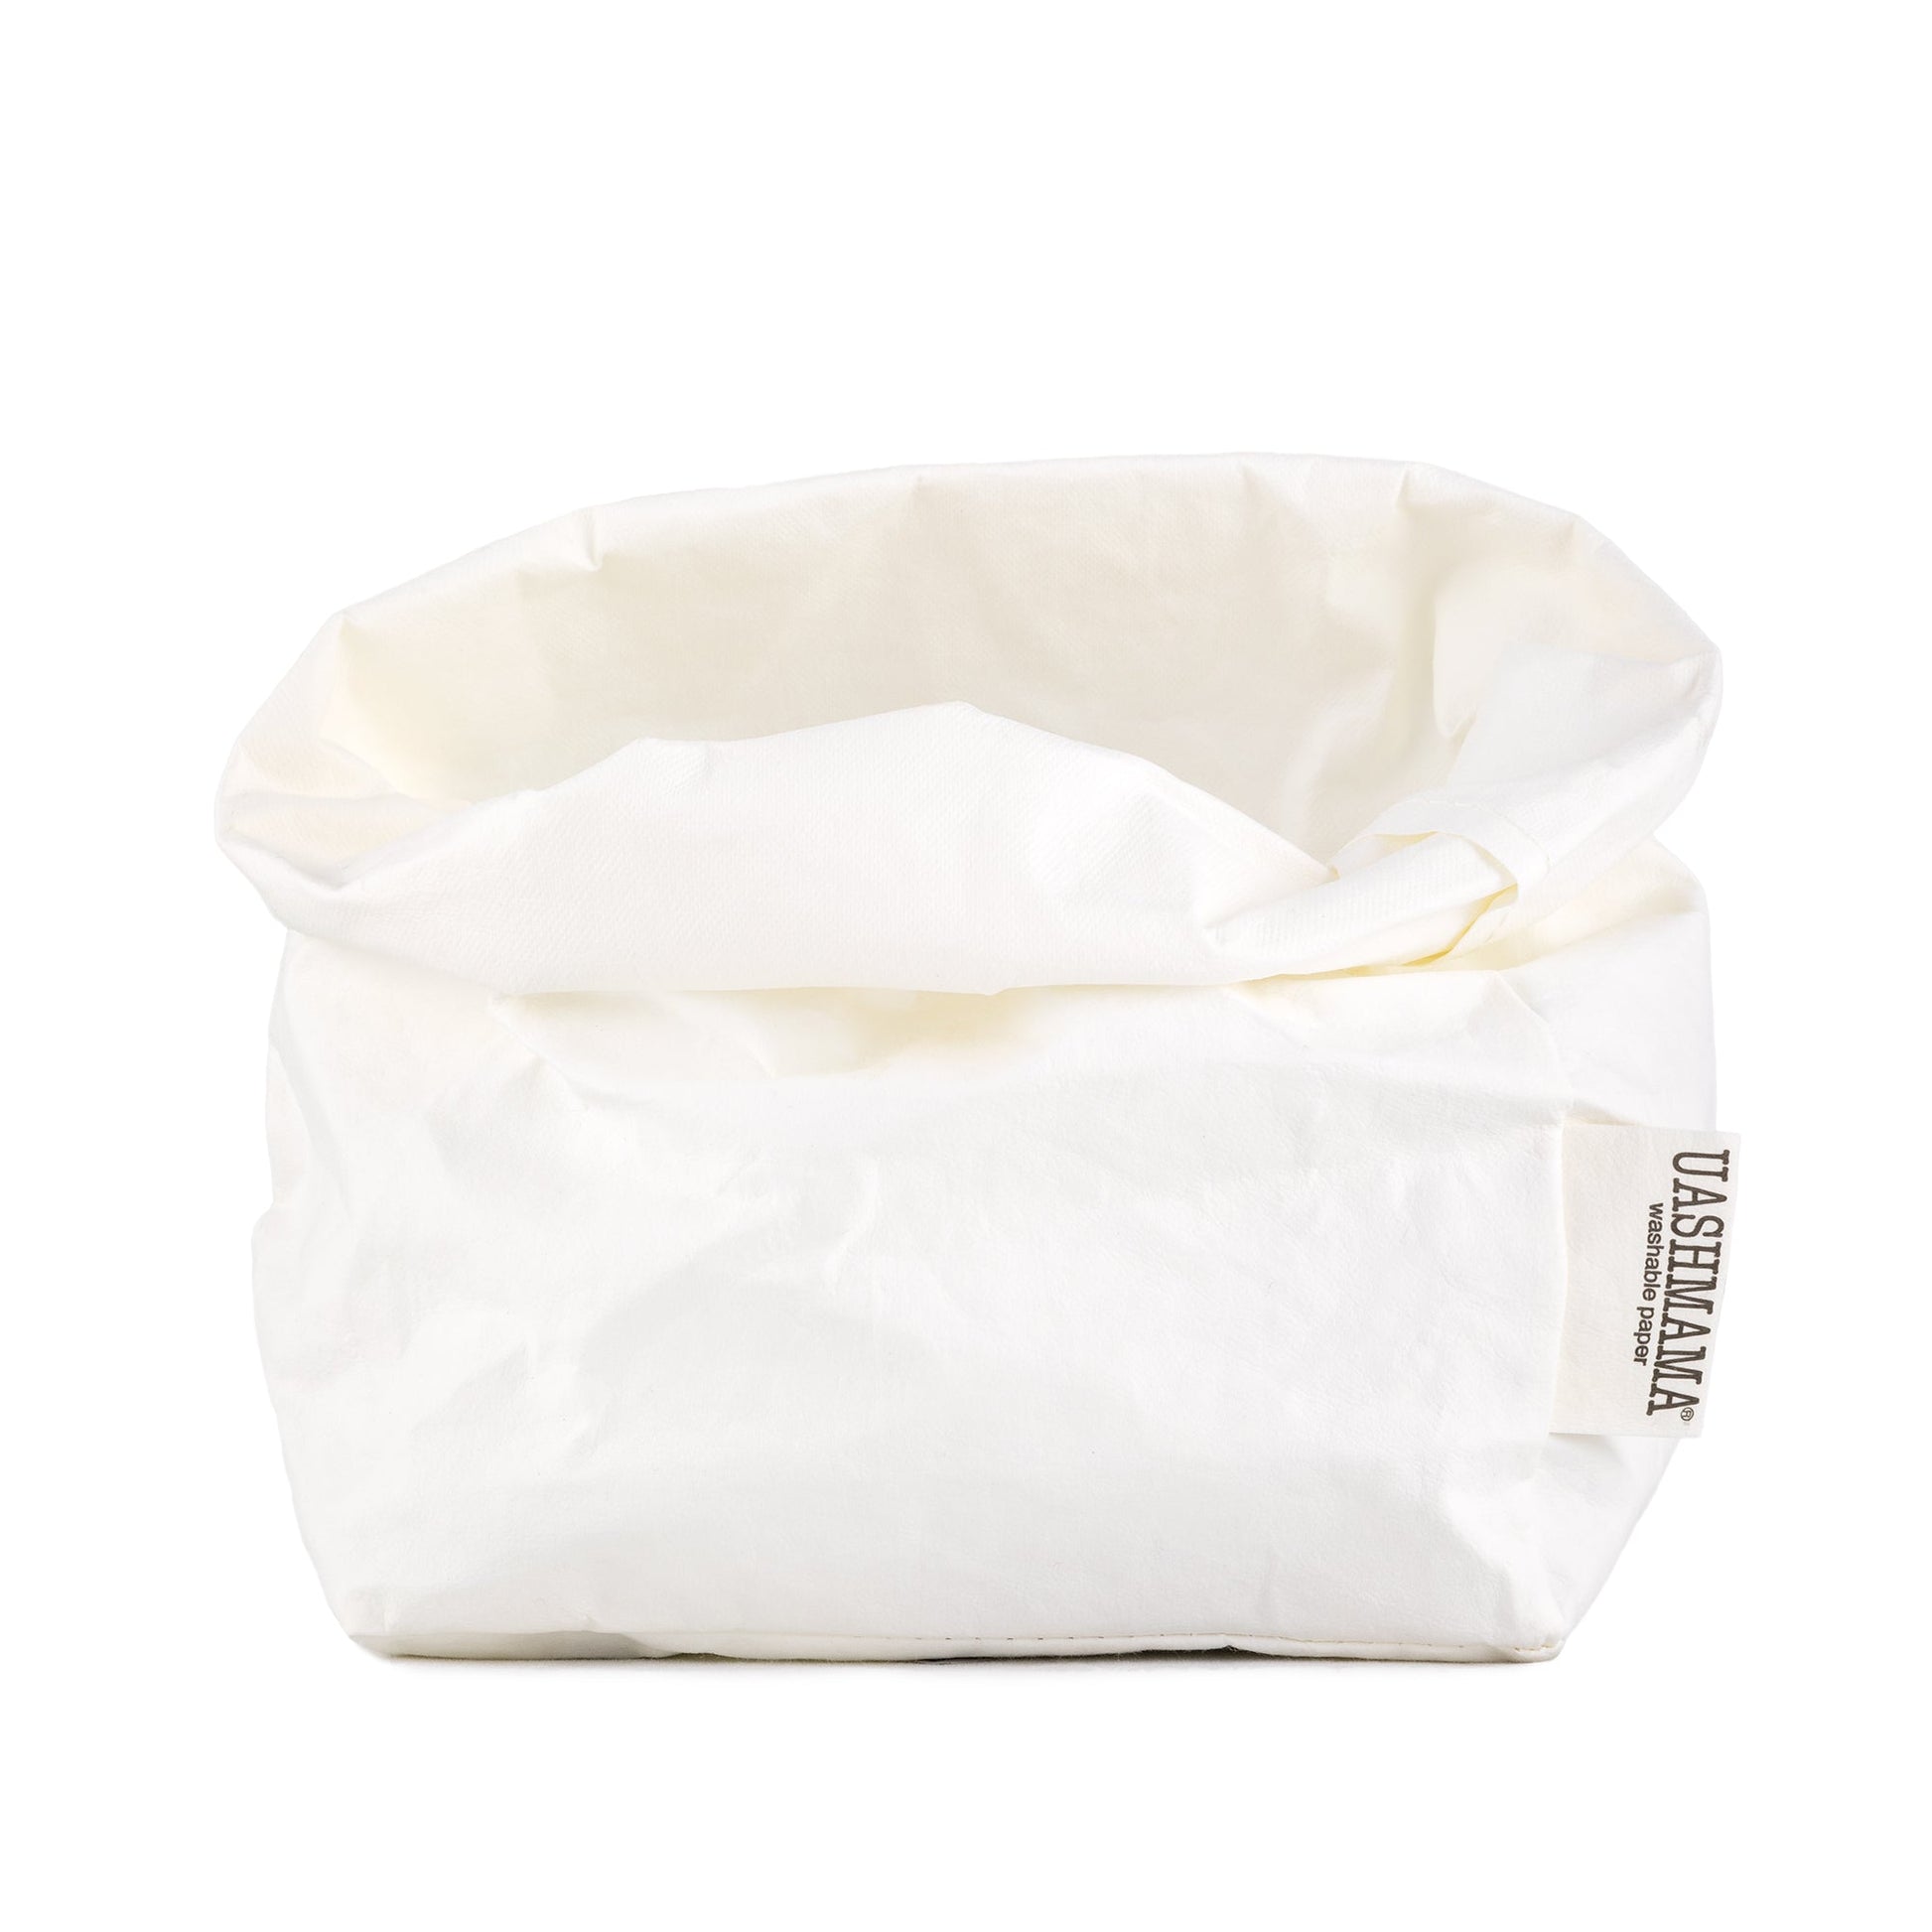 A washable paper bag is shown. The bag is rolled down at the top and features a UASHMAMA logo label on the bottom left corner. The bag pictured is the medium size in white.